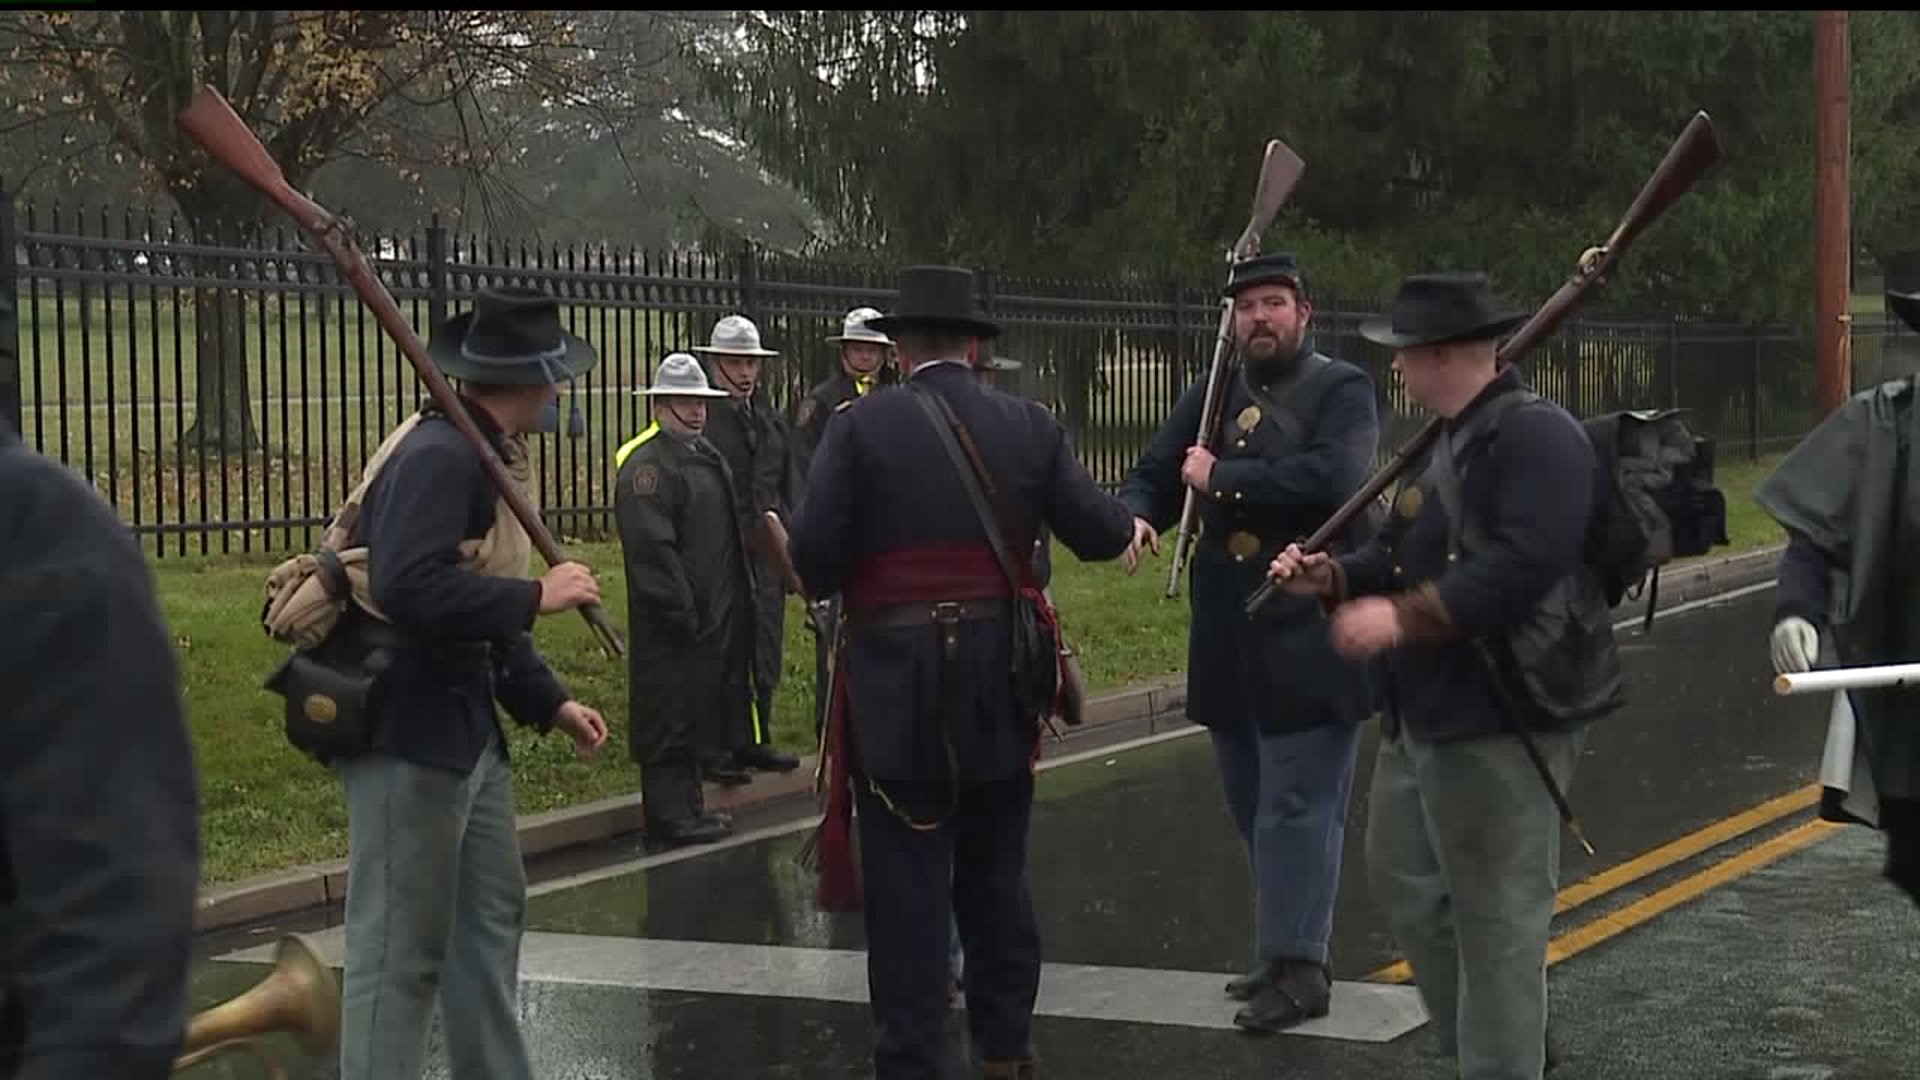 Annual Remembrance Day Parade takes place despite threat in Gettysburg